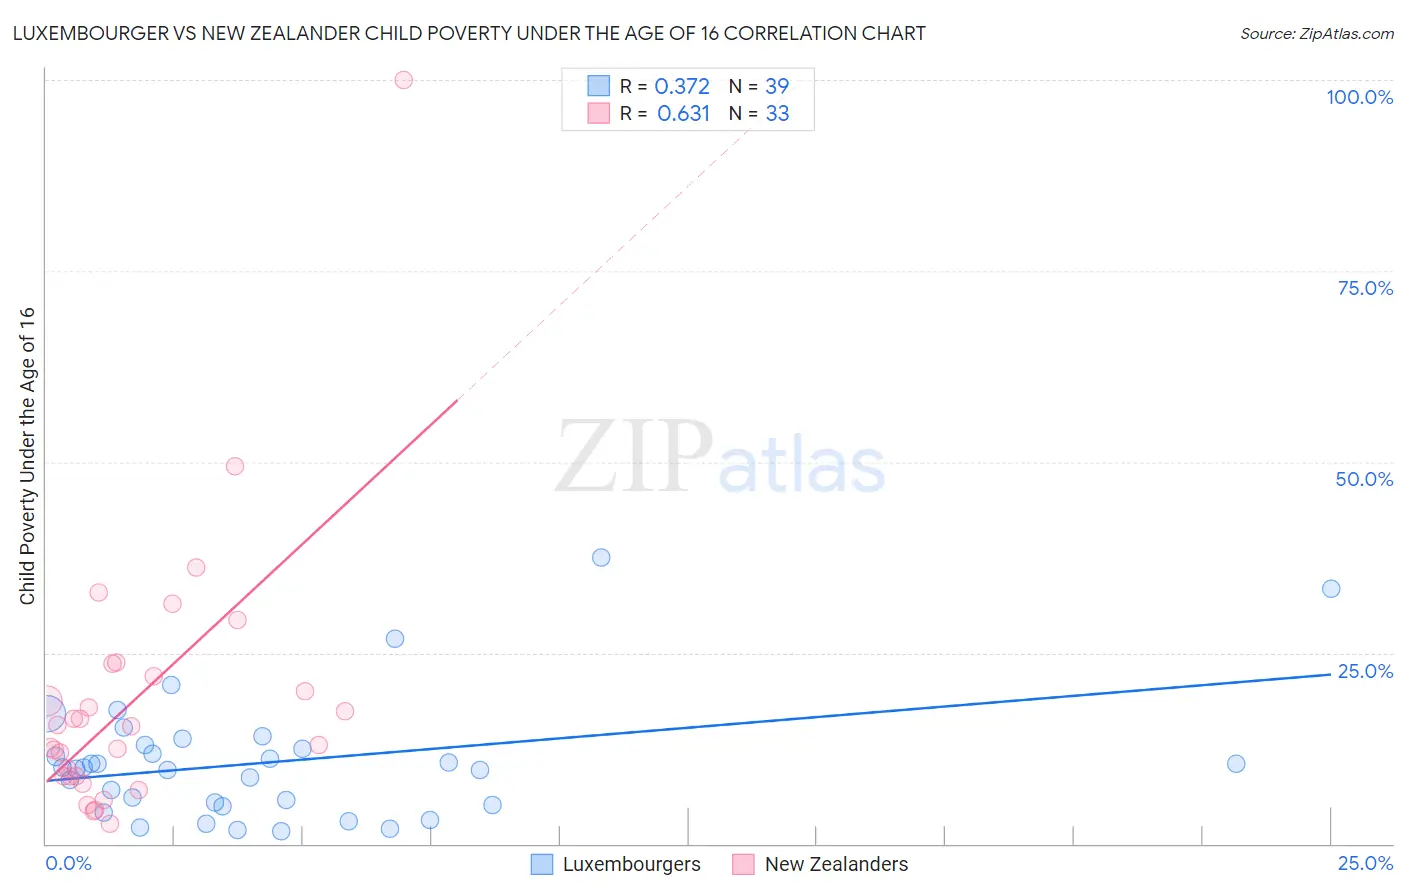 Luxembourger vs New Zealander Child Poverty Under the Age of 16